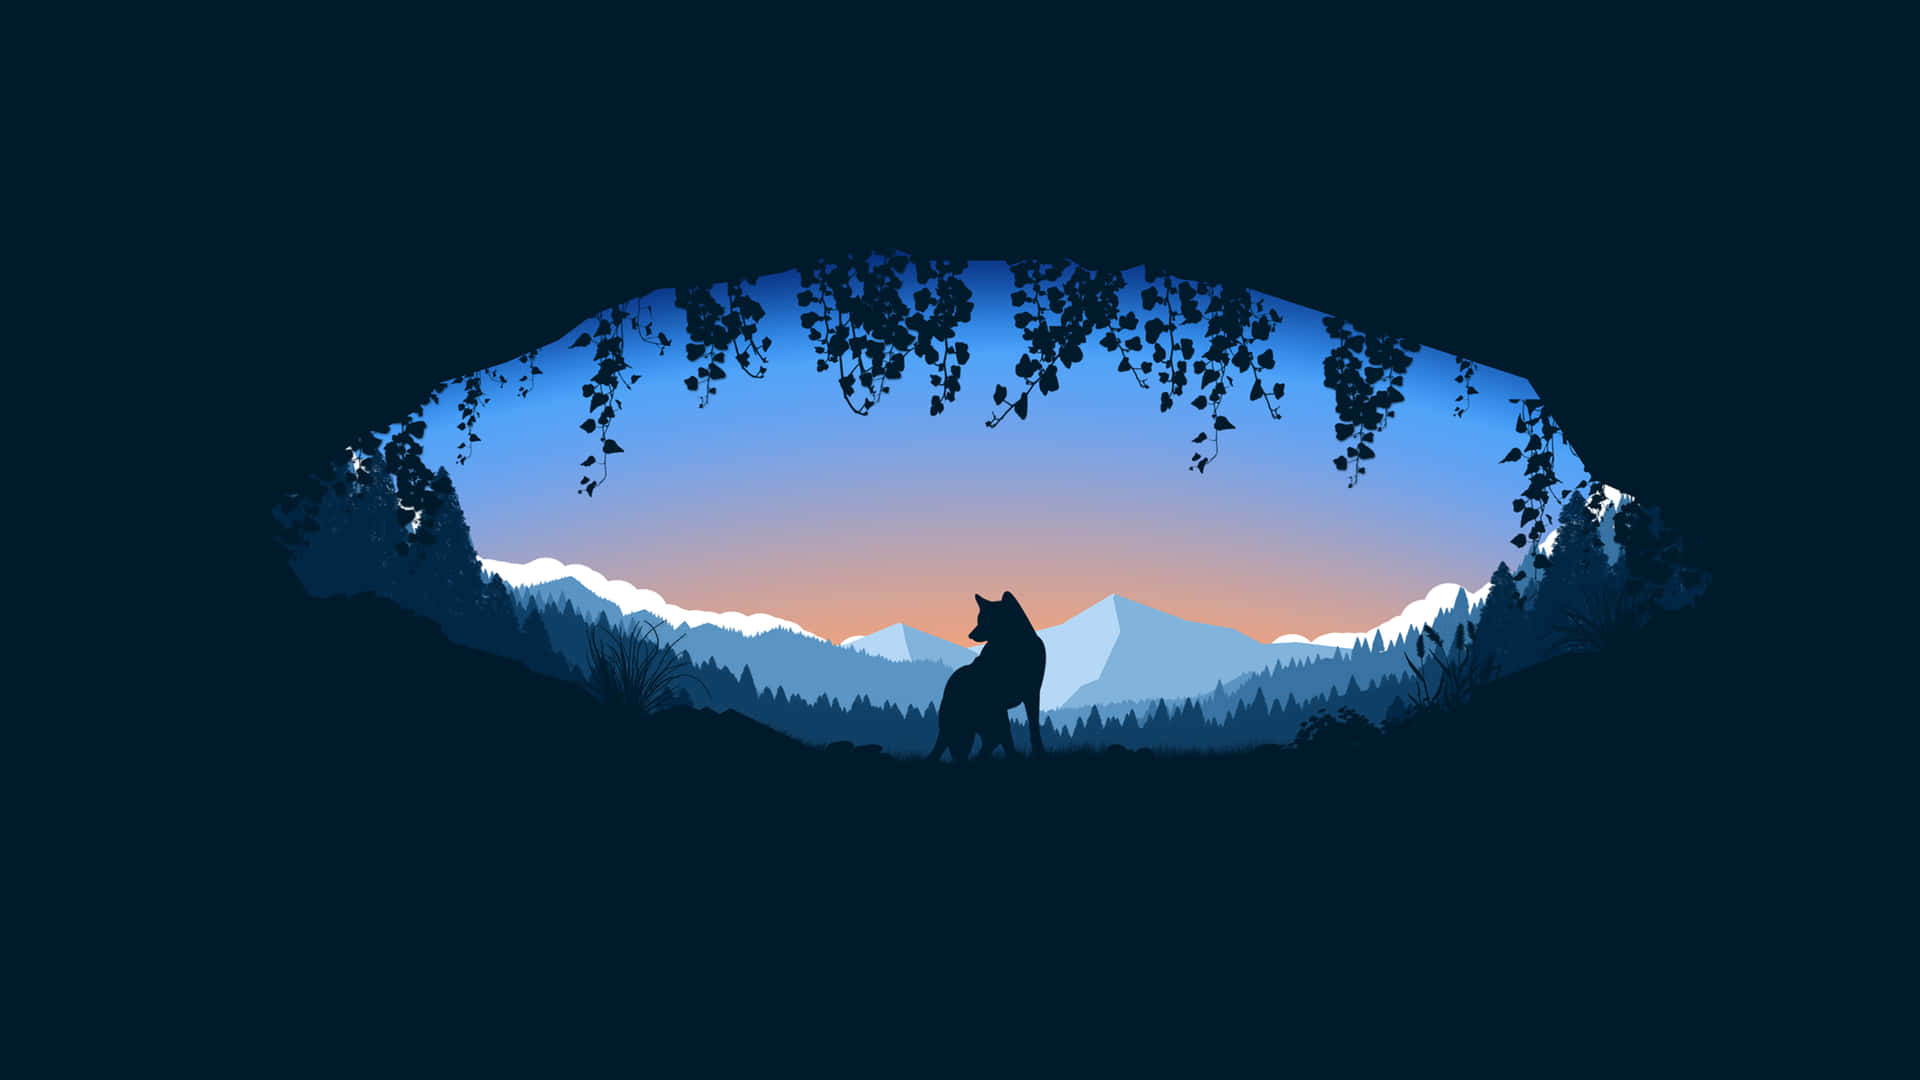 A Wolf In The Forest At Sunset